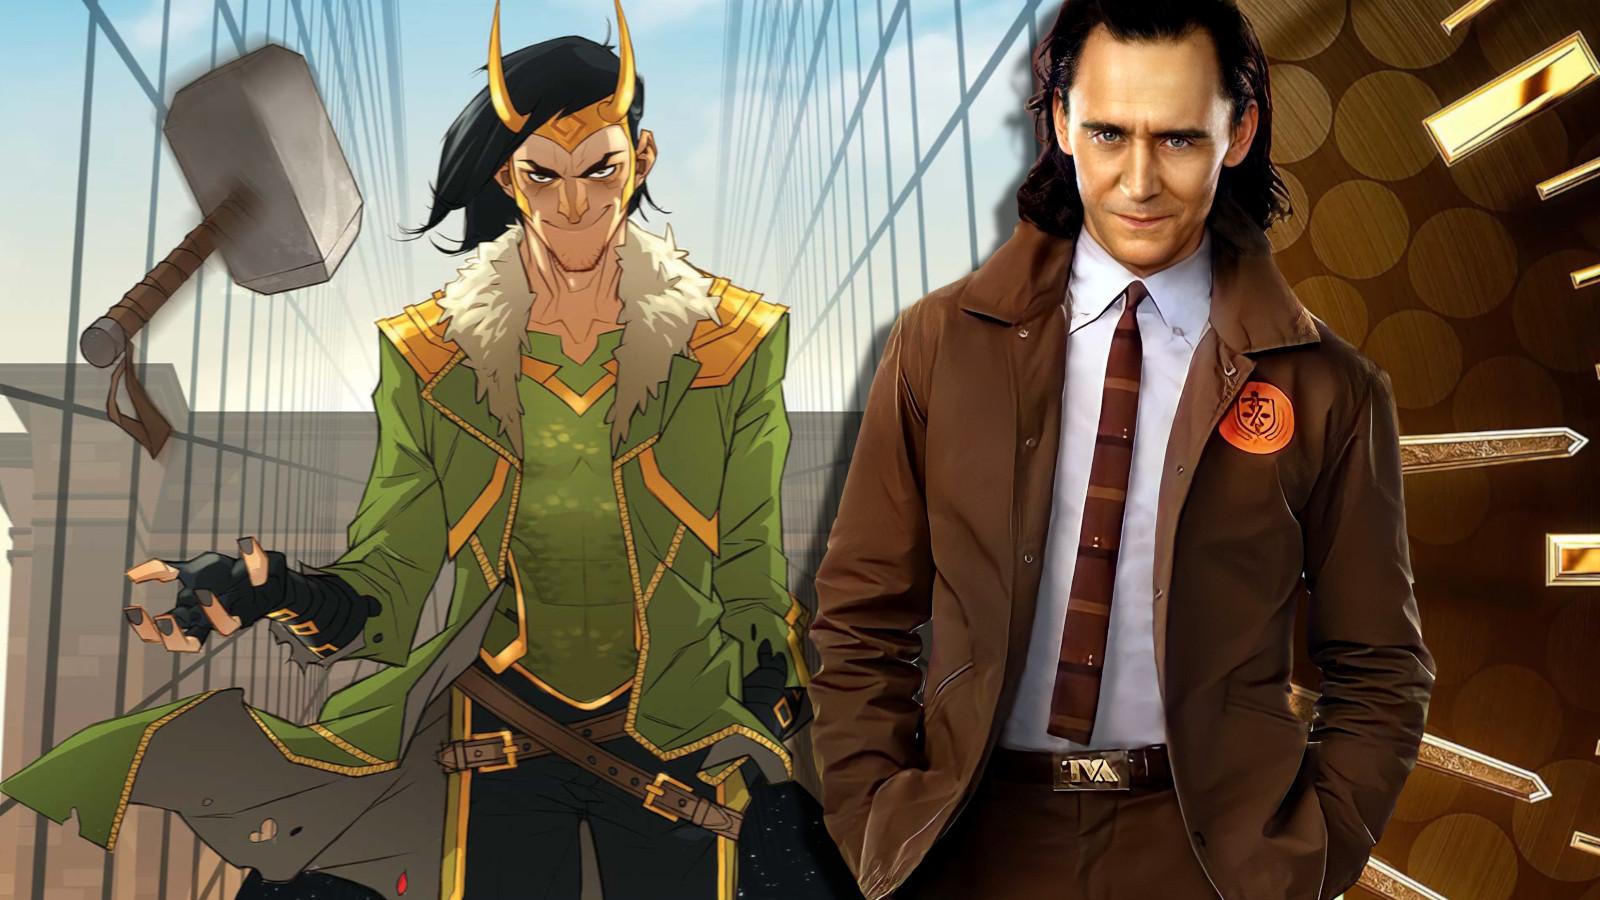 Loki as he appears in the MCU and Marvel Comics